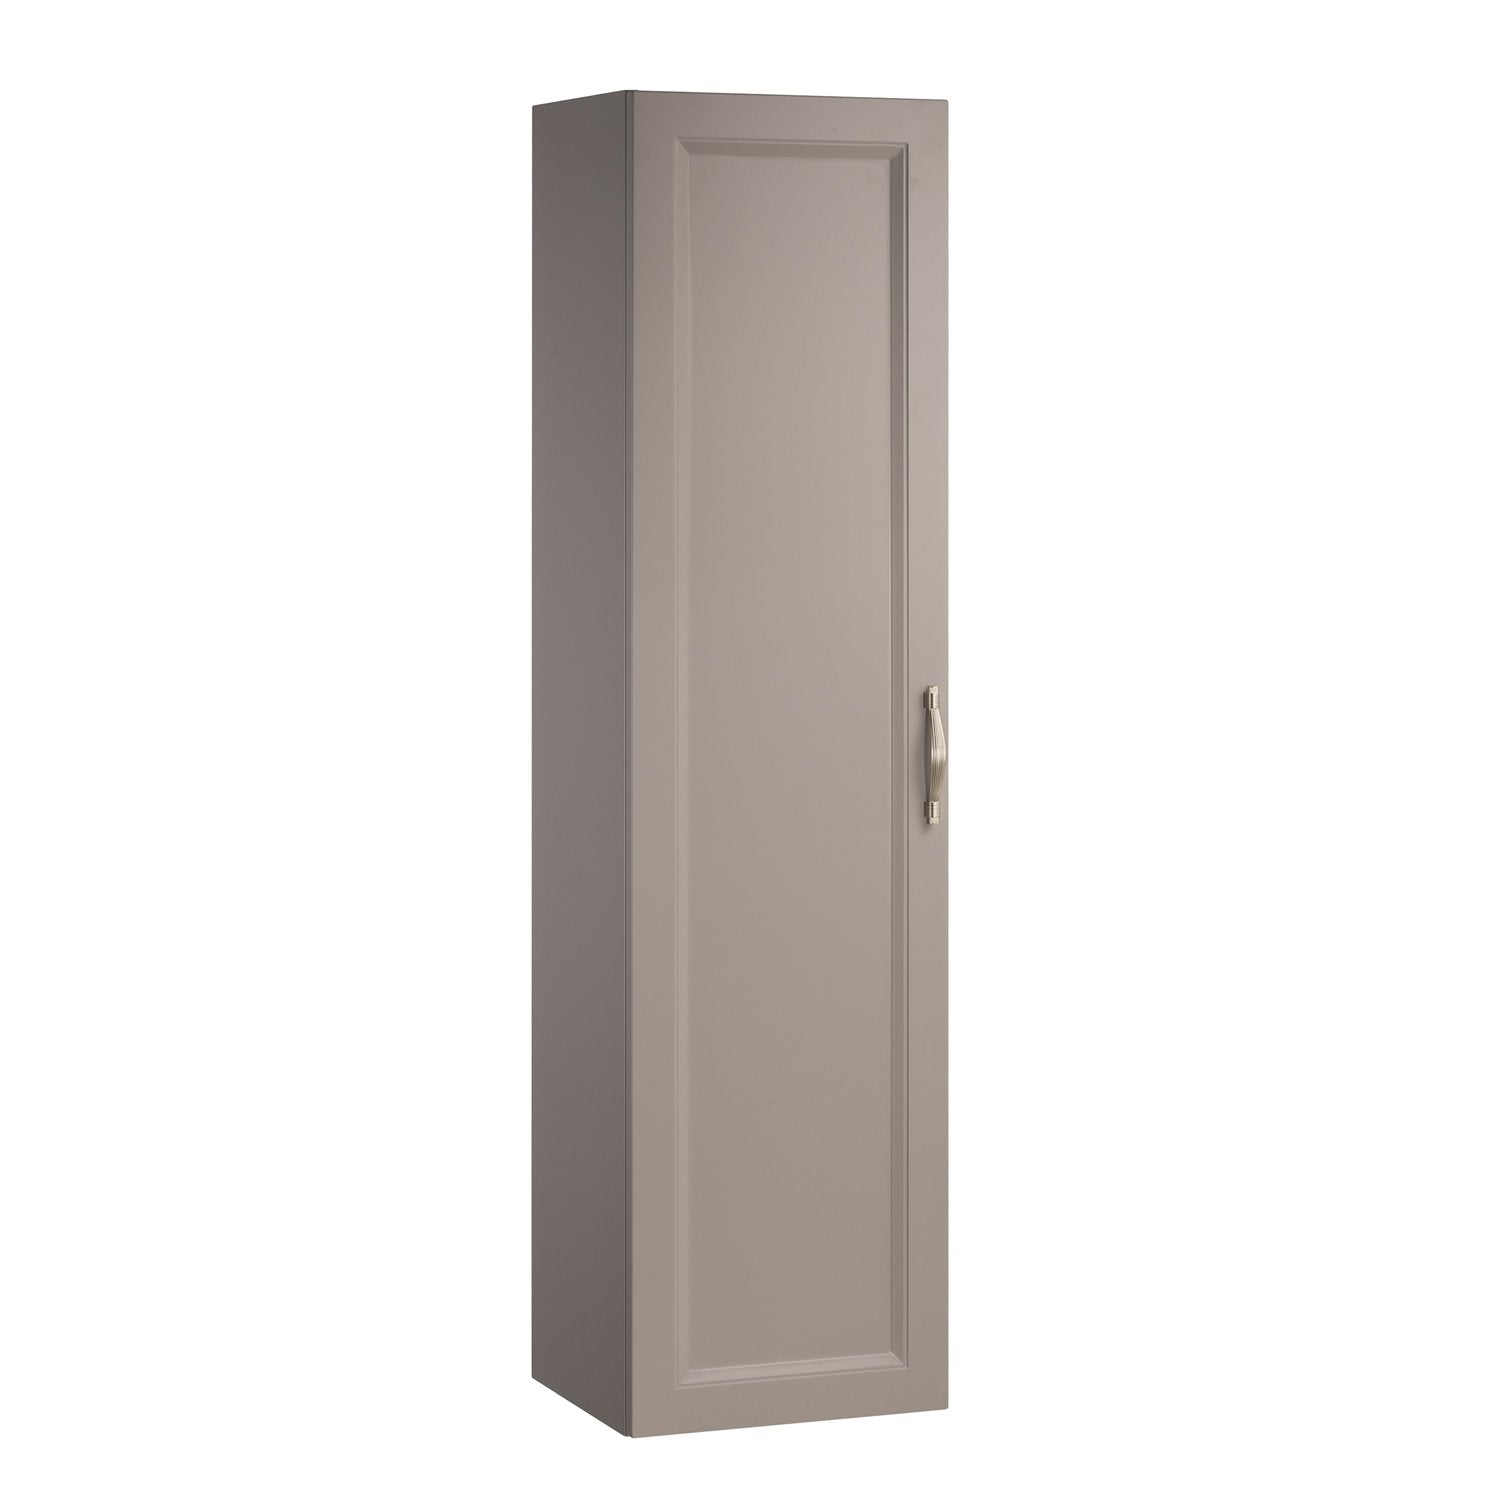 16" Tall Side Cabinet, Wall Mount, 1 Door whit Handle and Soft Close and Reversible Opening, Mink, Serie Class by VALENZUELA